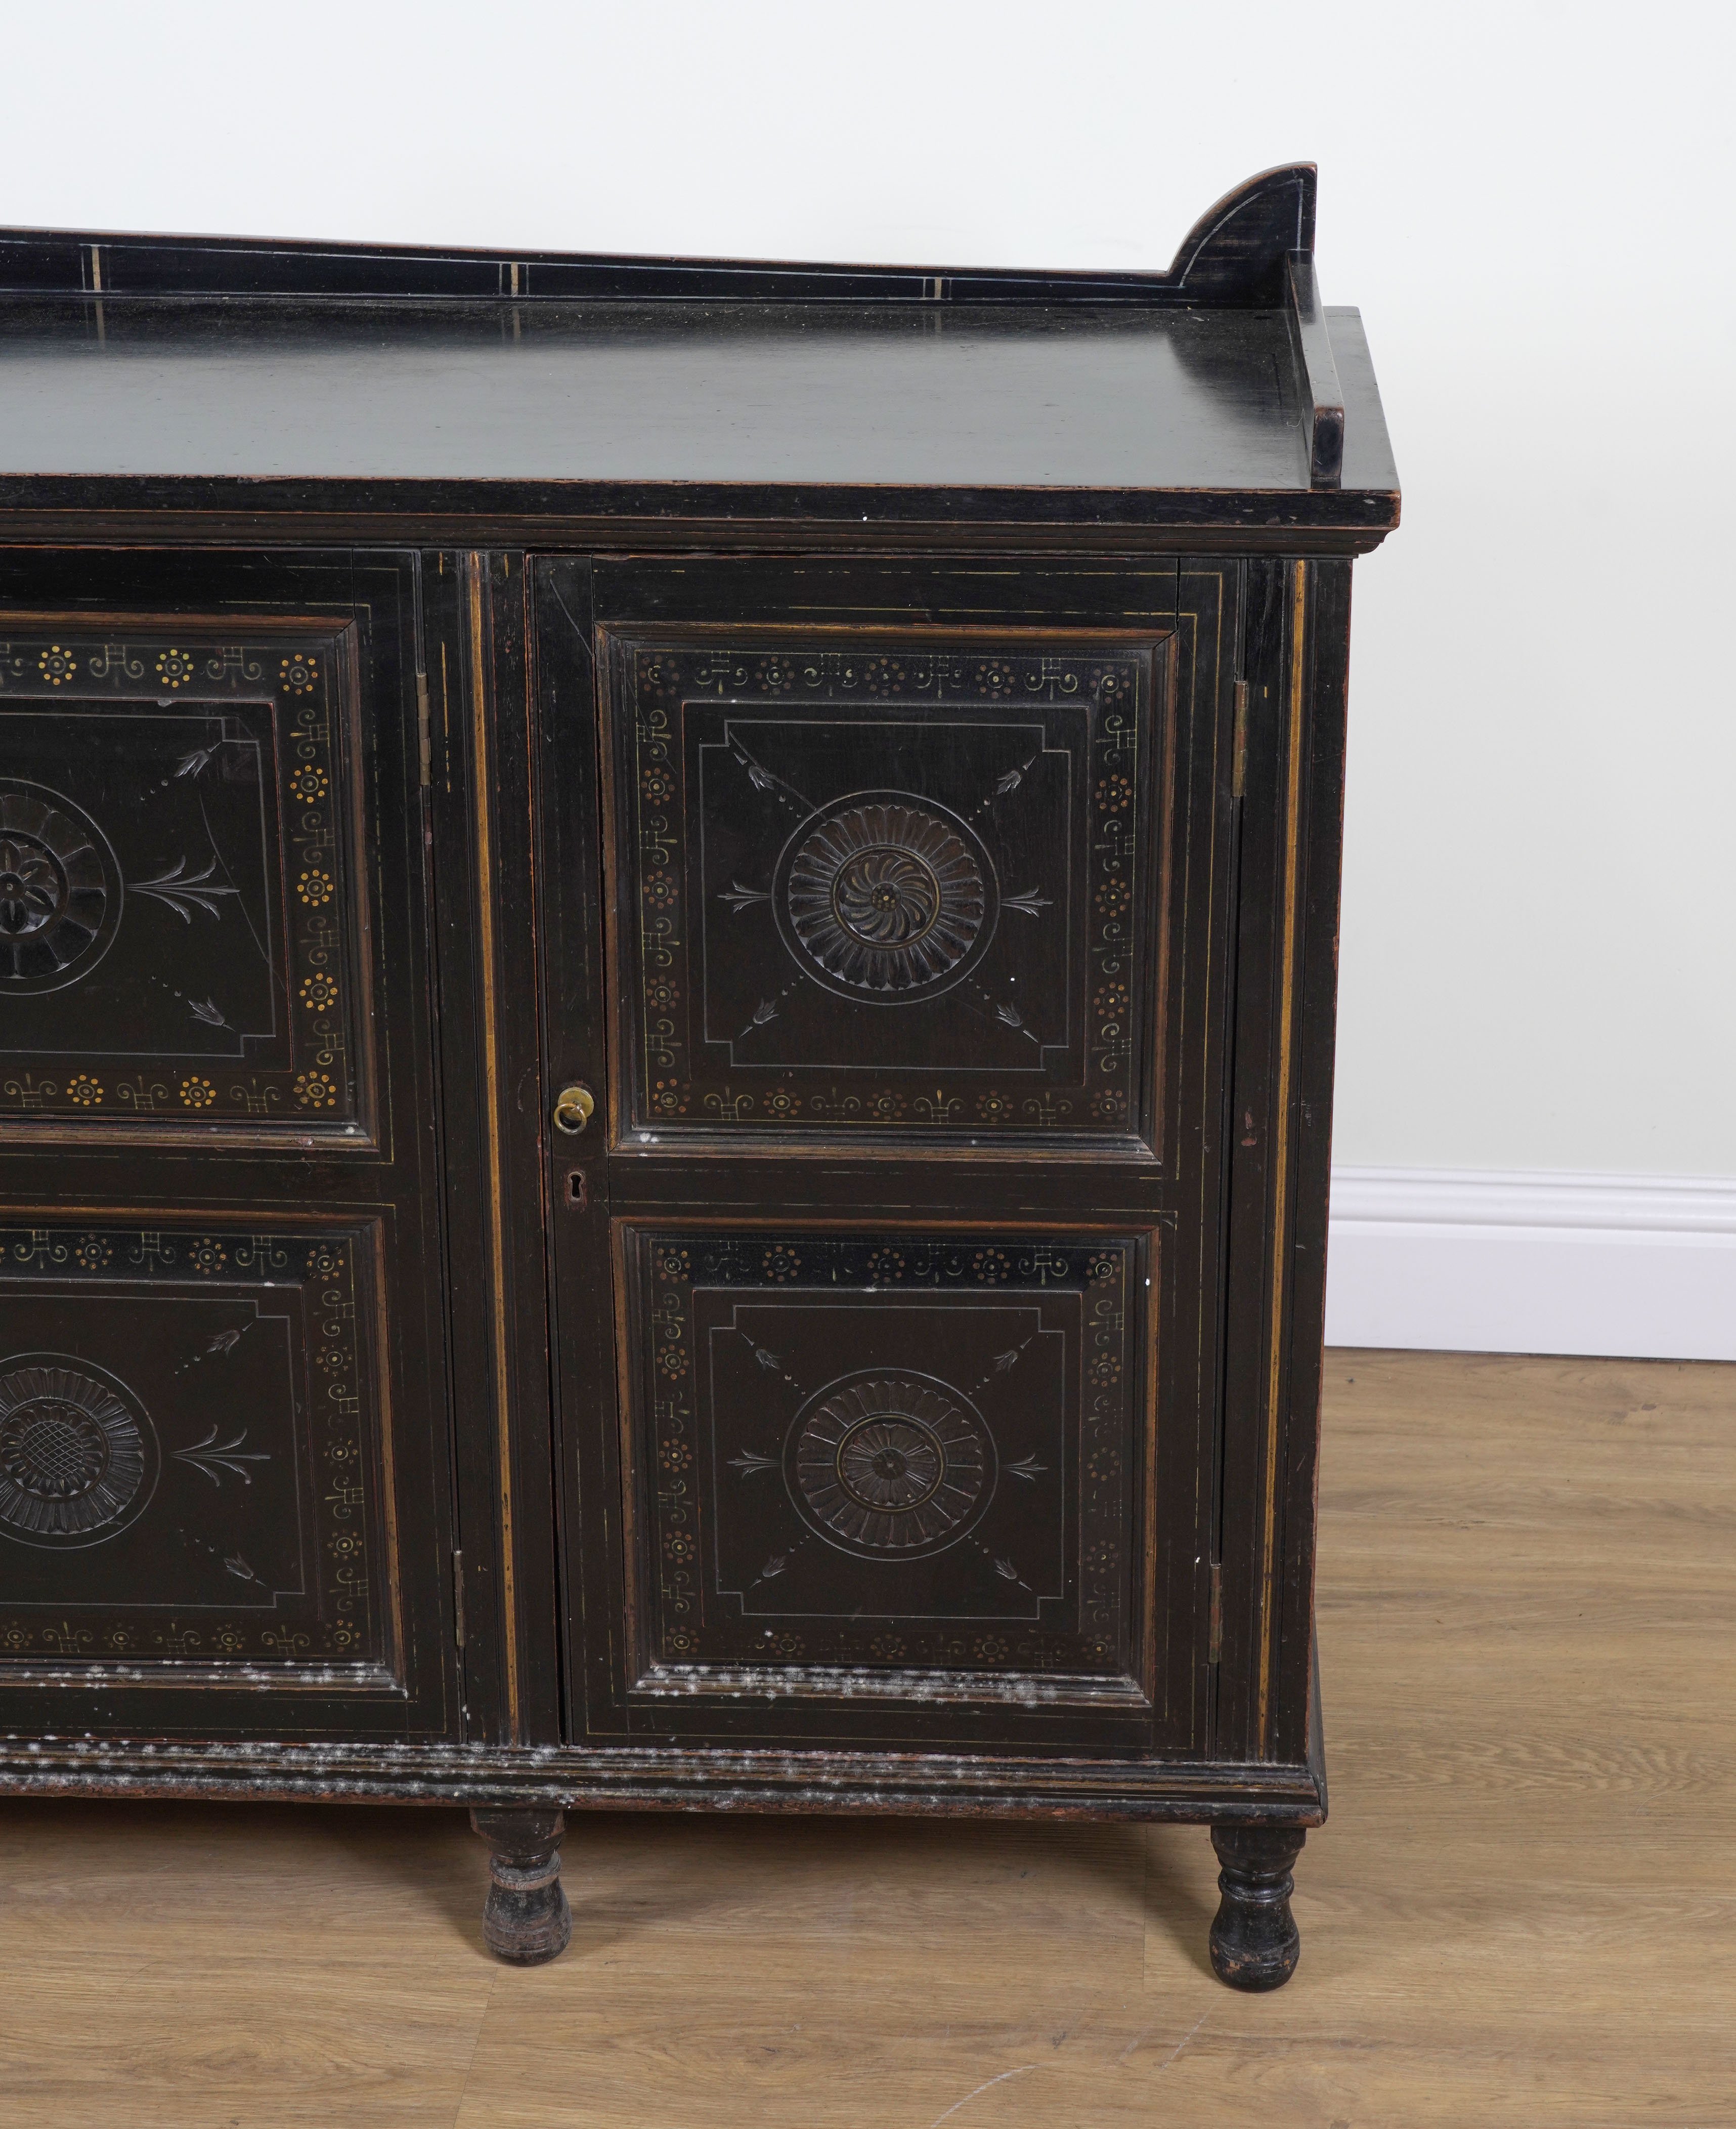 AN AESTHETIC MOVEMENT BLACK LACQUER AND POLYCHROME PAINTED FOUR DOOR SIDE CABINET - Image 3 of 15